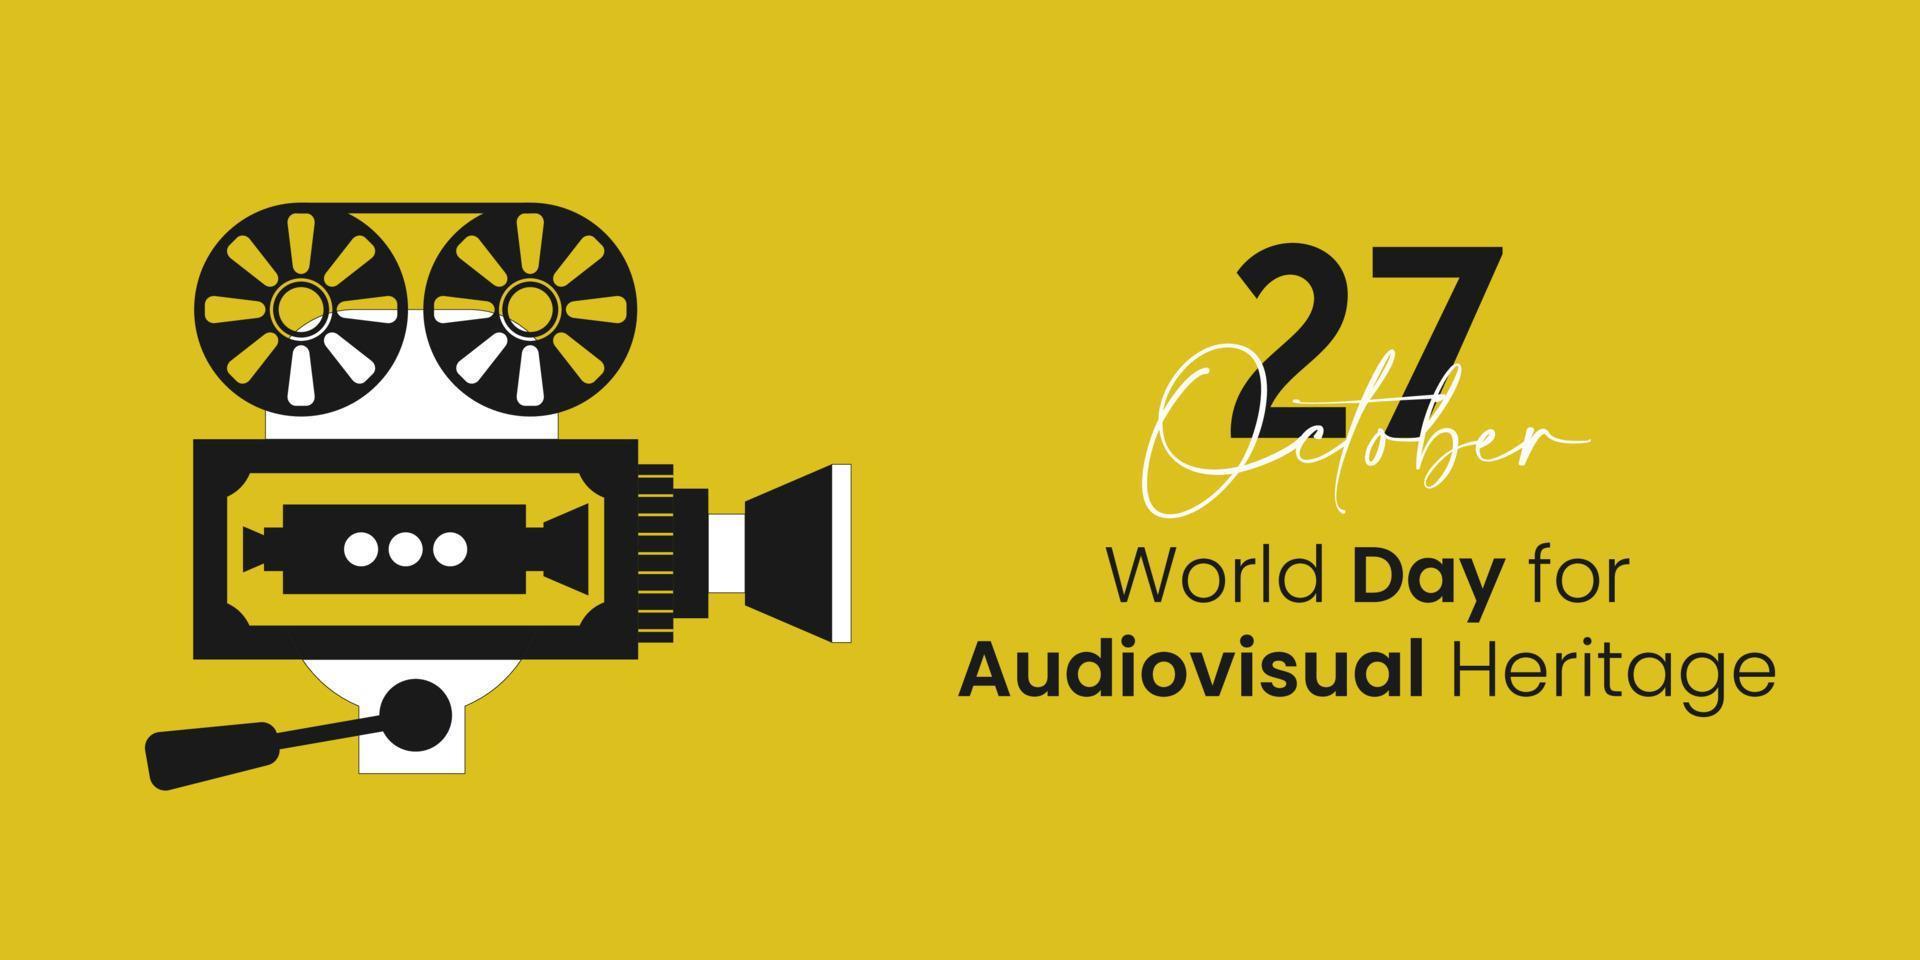 Banner vector illustration on the theme of World Audiovisual heritage day observed each year on October 27 across the globe.